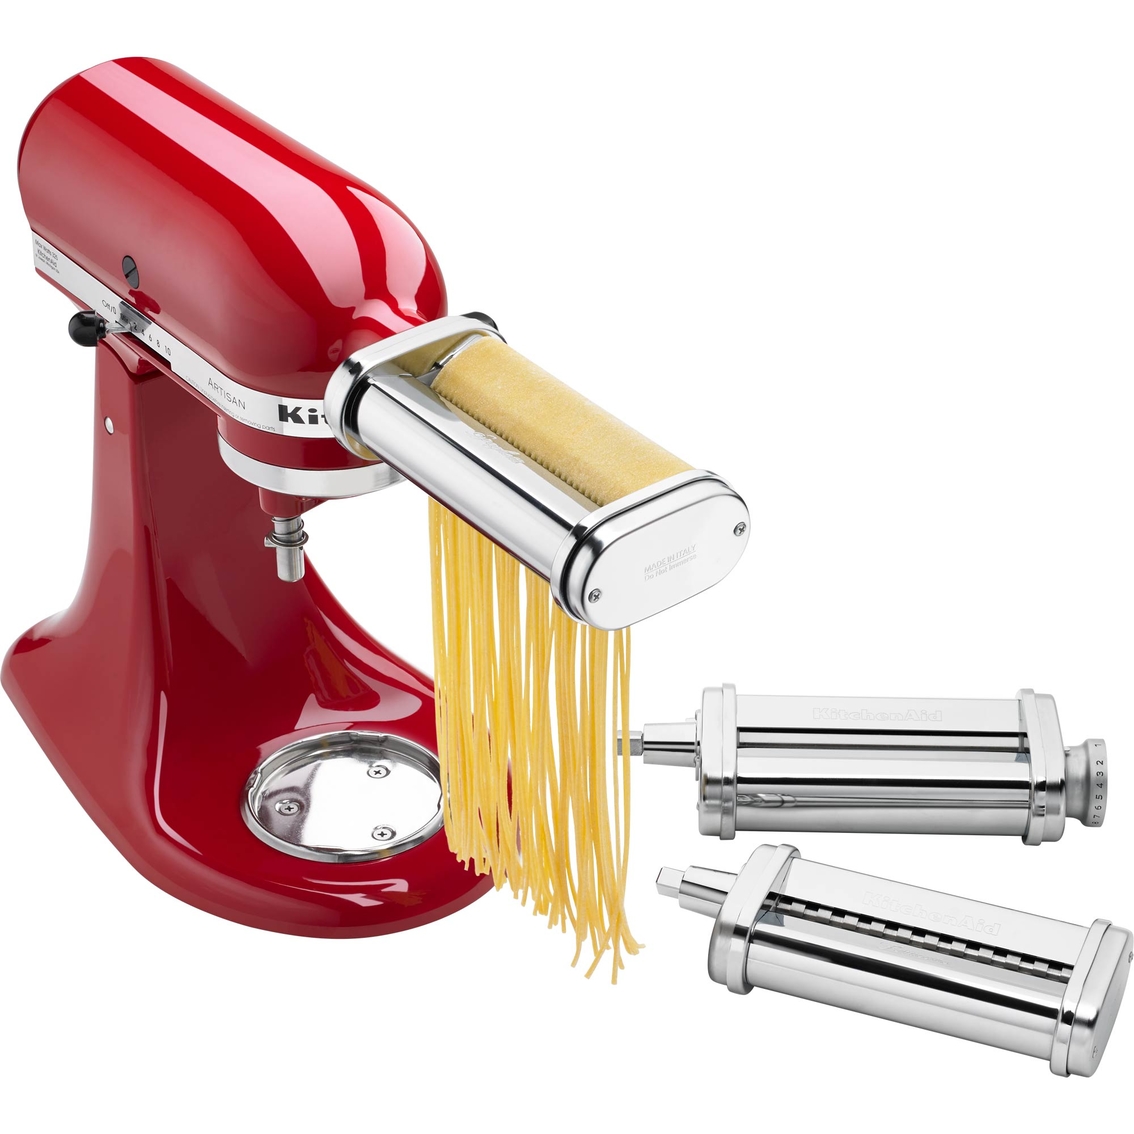 KitchenAid Pasta Roller and Cutter Set Accessory - Image 2 of 3